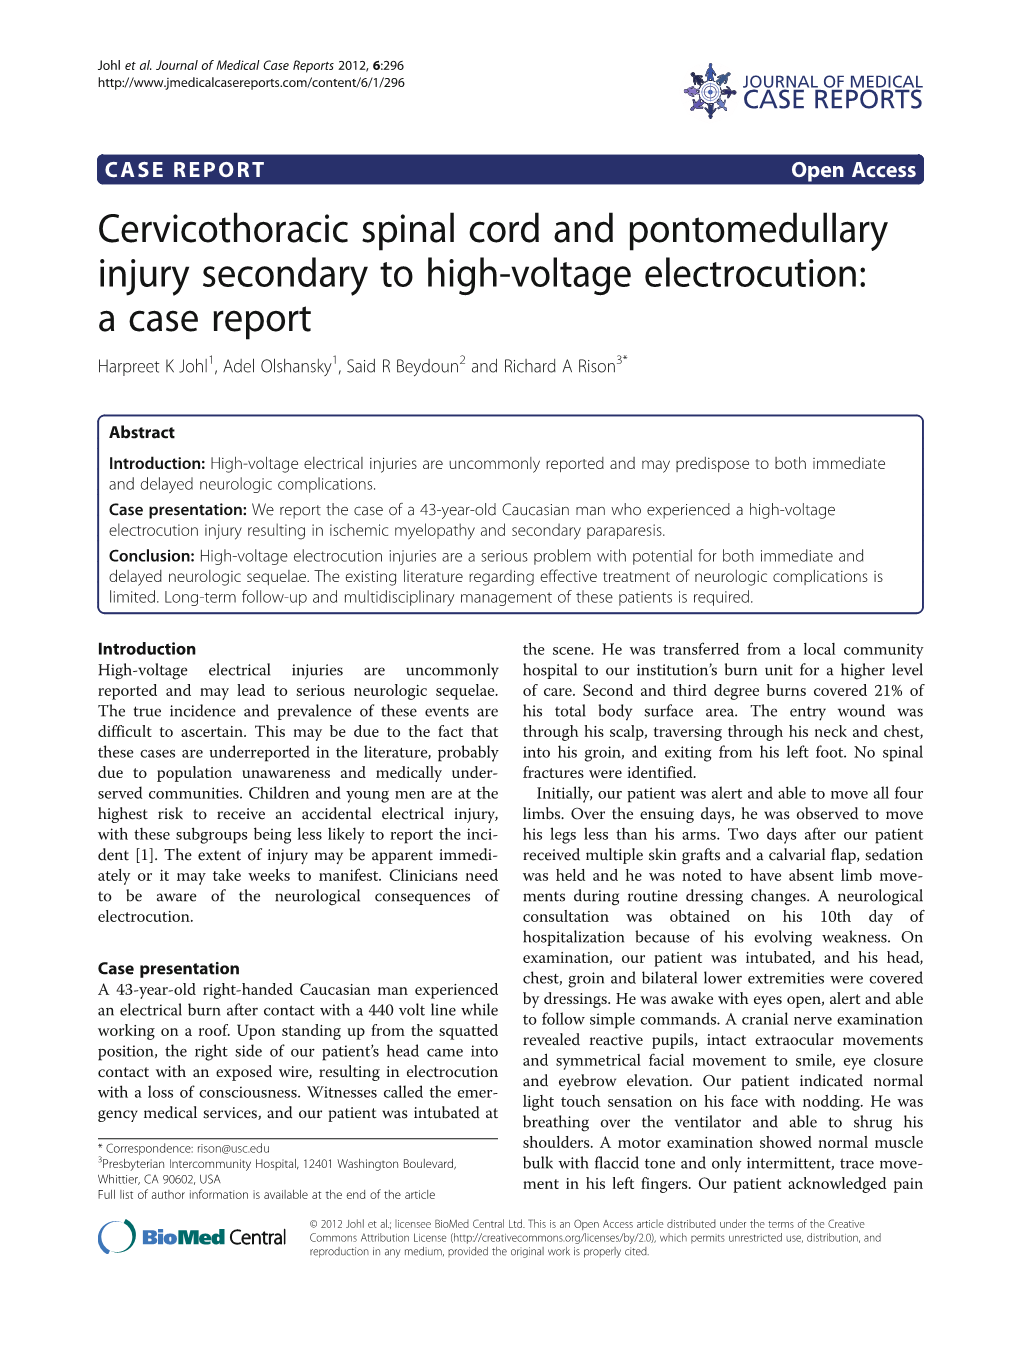 Cervicothoracic Spinal Cord and Pontomedullary